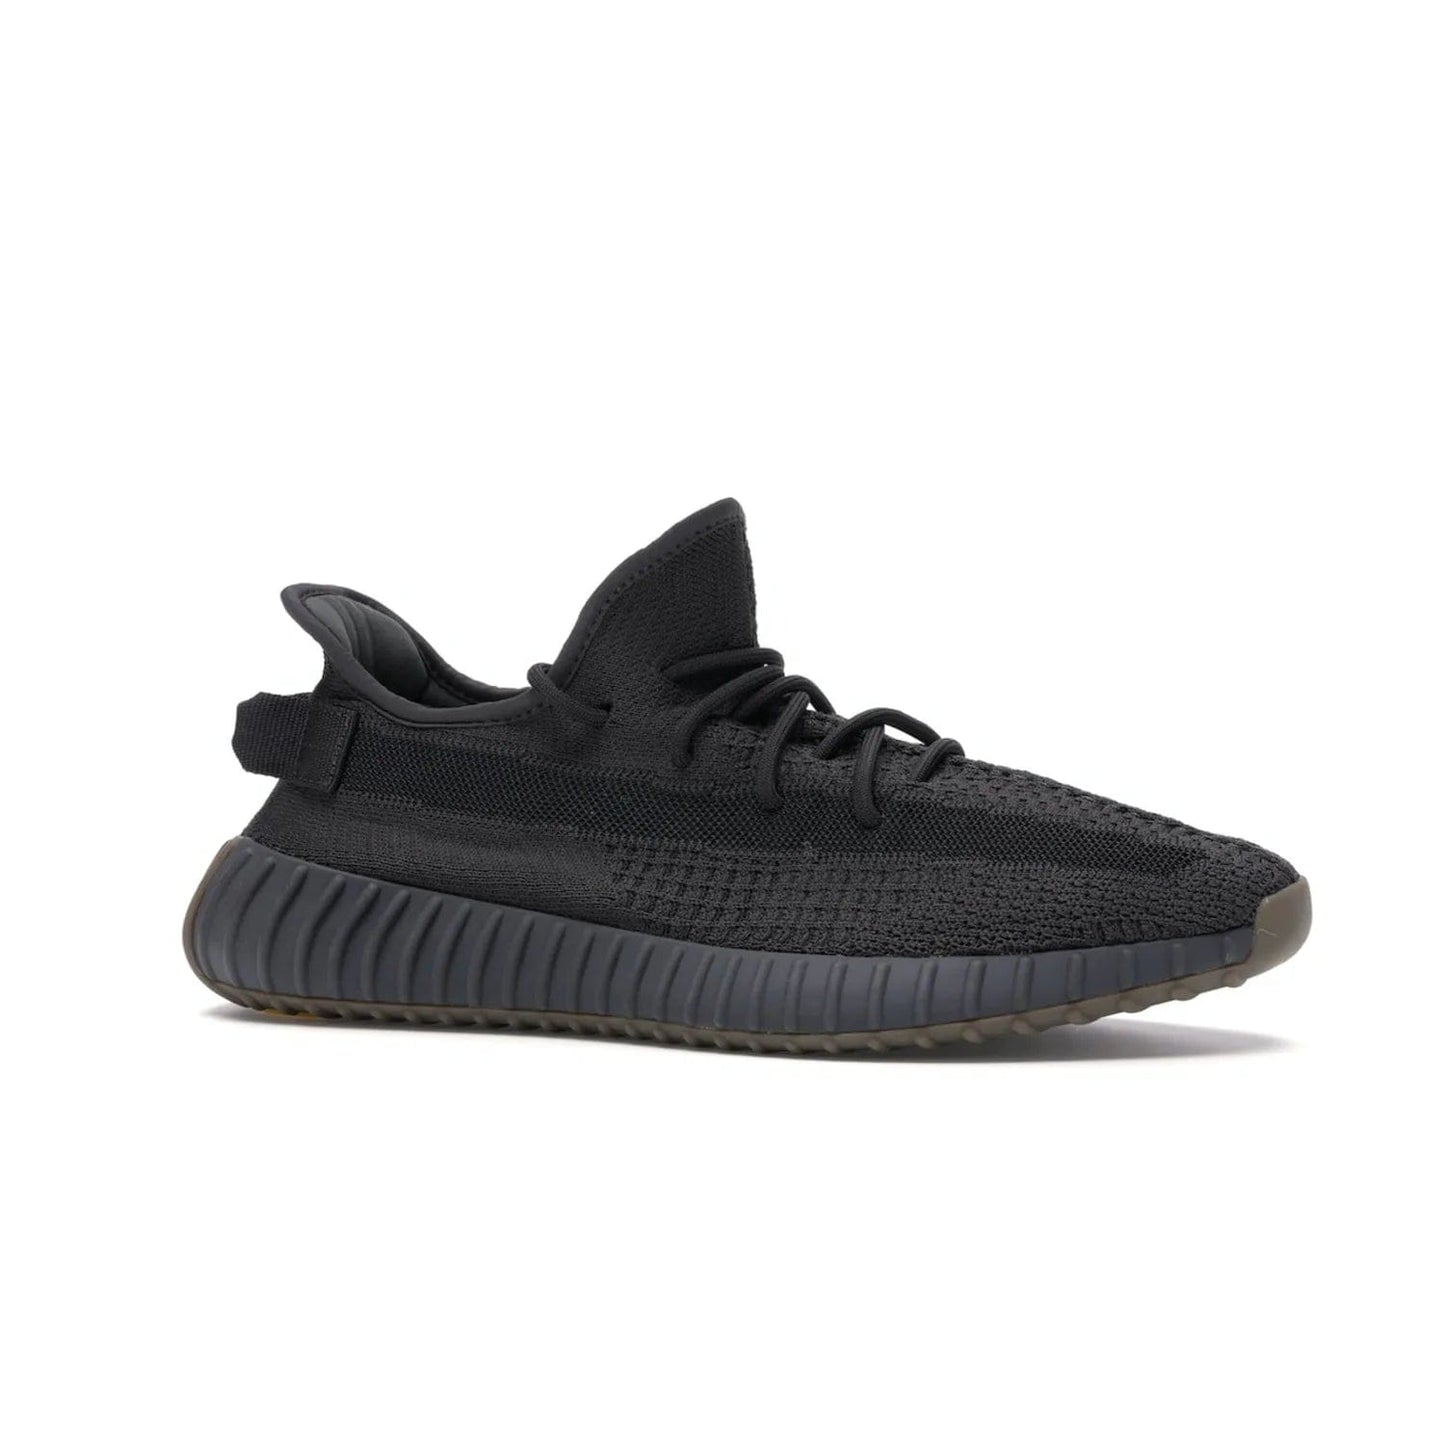 adidas Yeezy Boost 350 V2 Cinder - Image 3 - Only at www.BallersClubKickz.com - Shop for the stylish and eye catching adidas Yeezy 350 V2 Cinder in earth tones. Boost cushioned midsole and gold outsole add a touch of boldness. A timeless addition to any wardrobe.